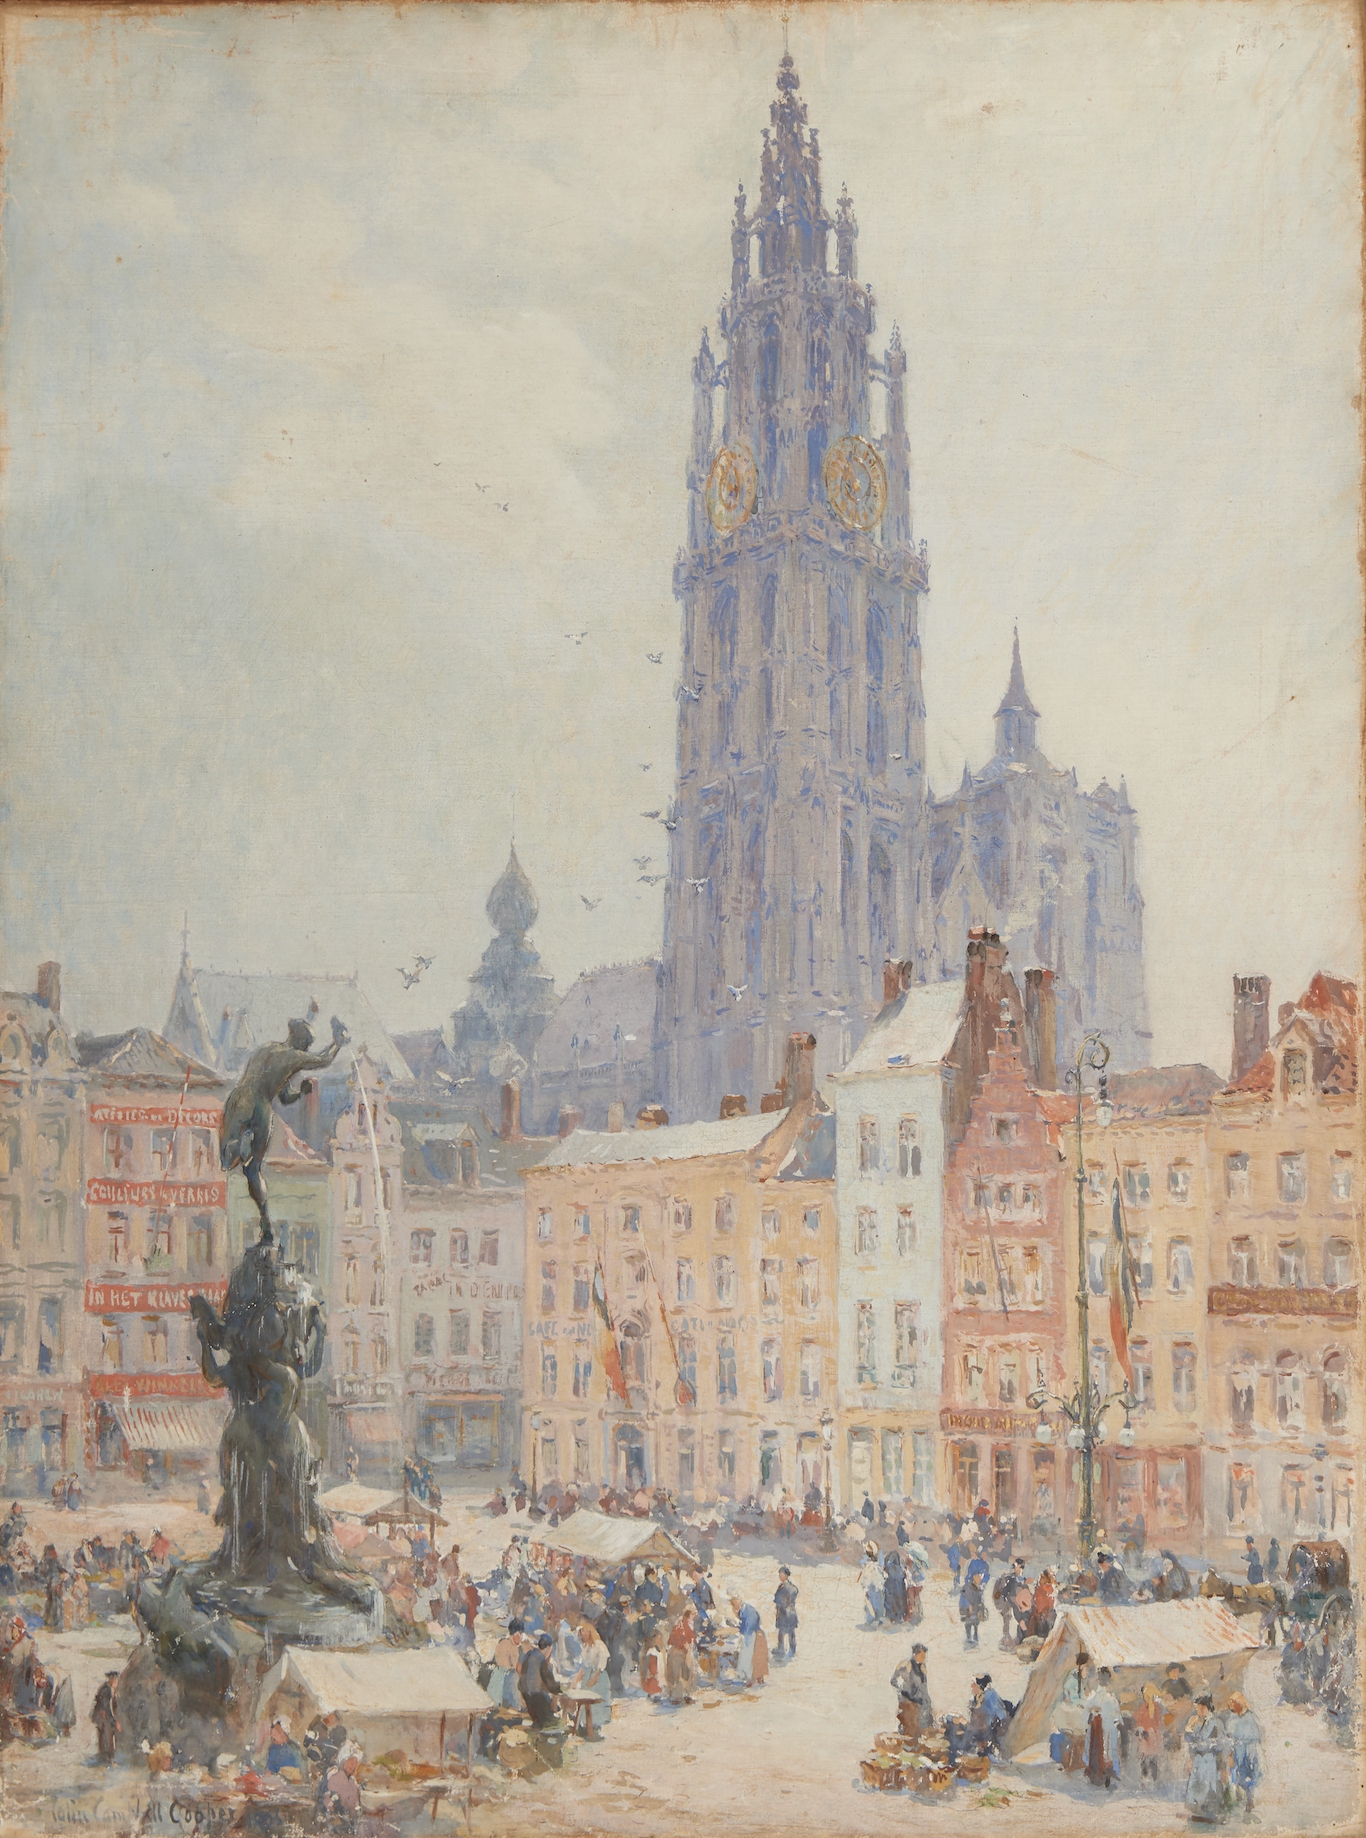 Colin Campbell Cooper (American, 1856–1937), The Grand Place, Antwerp, 1908